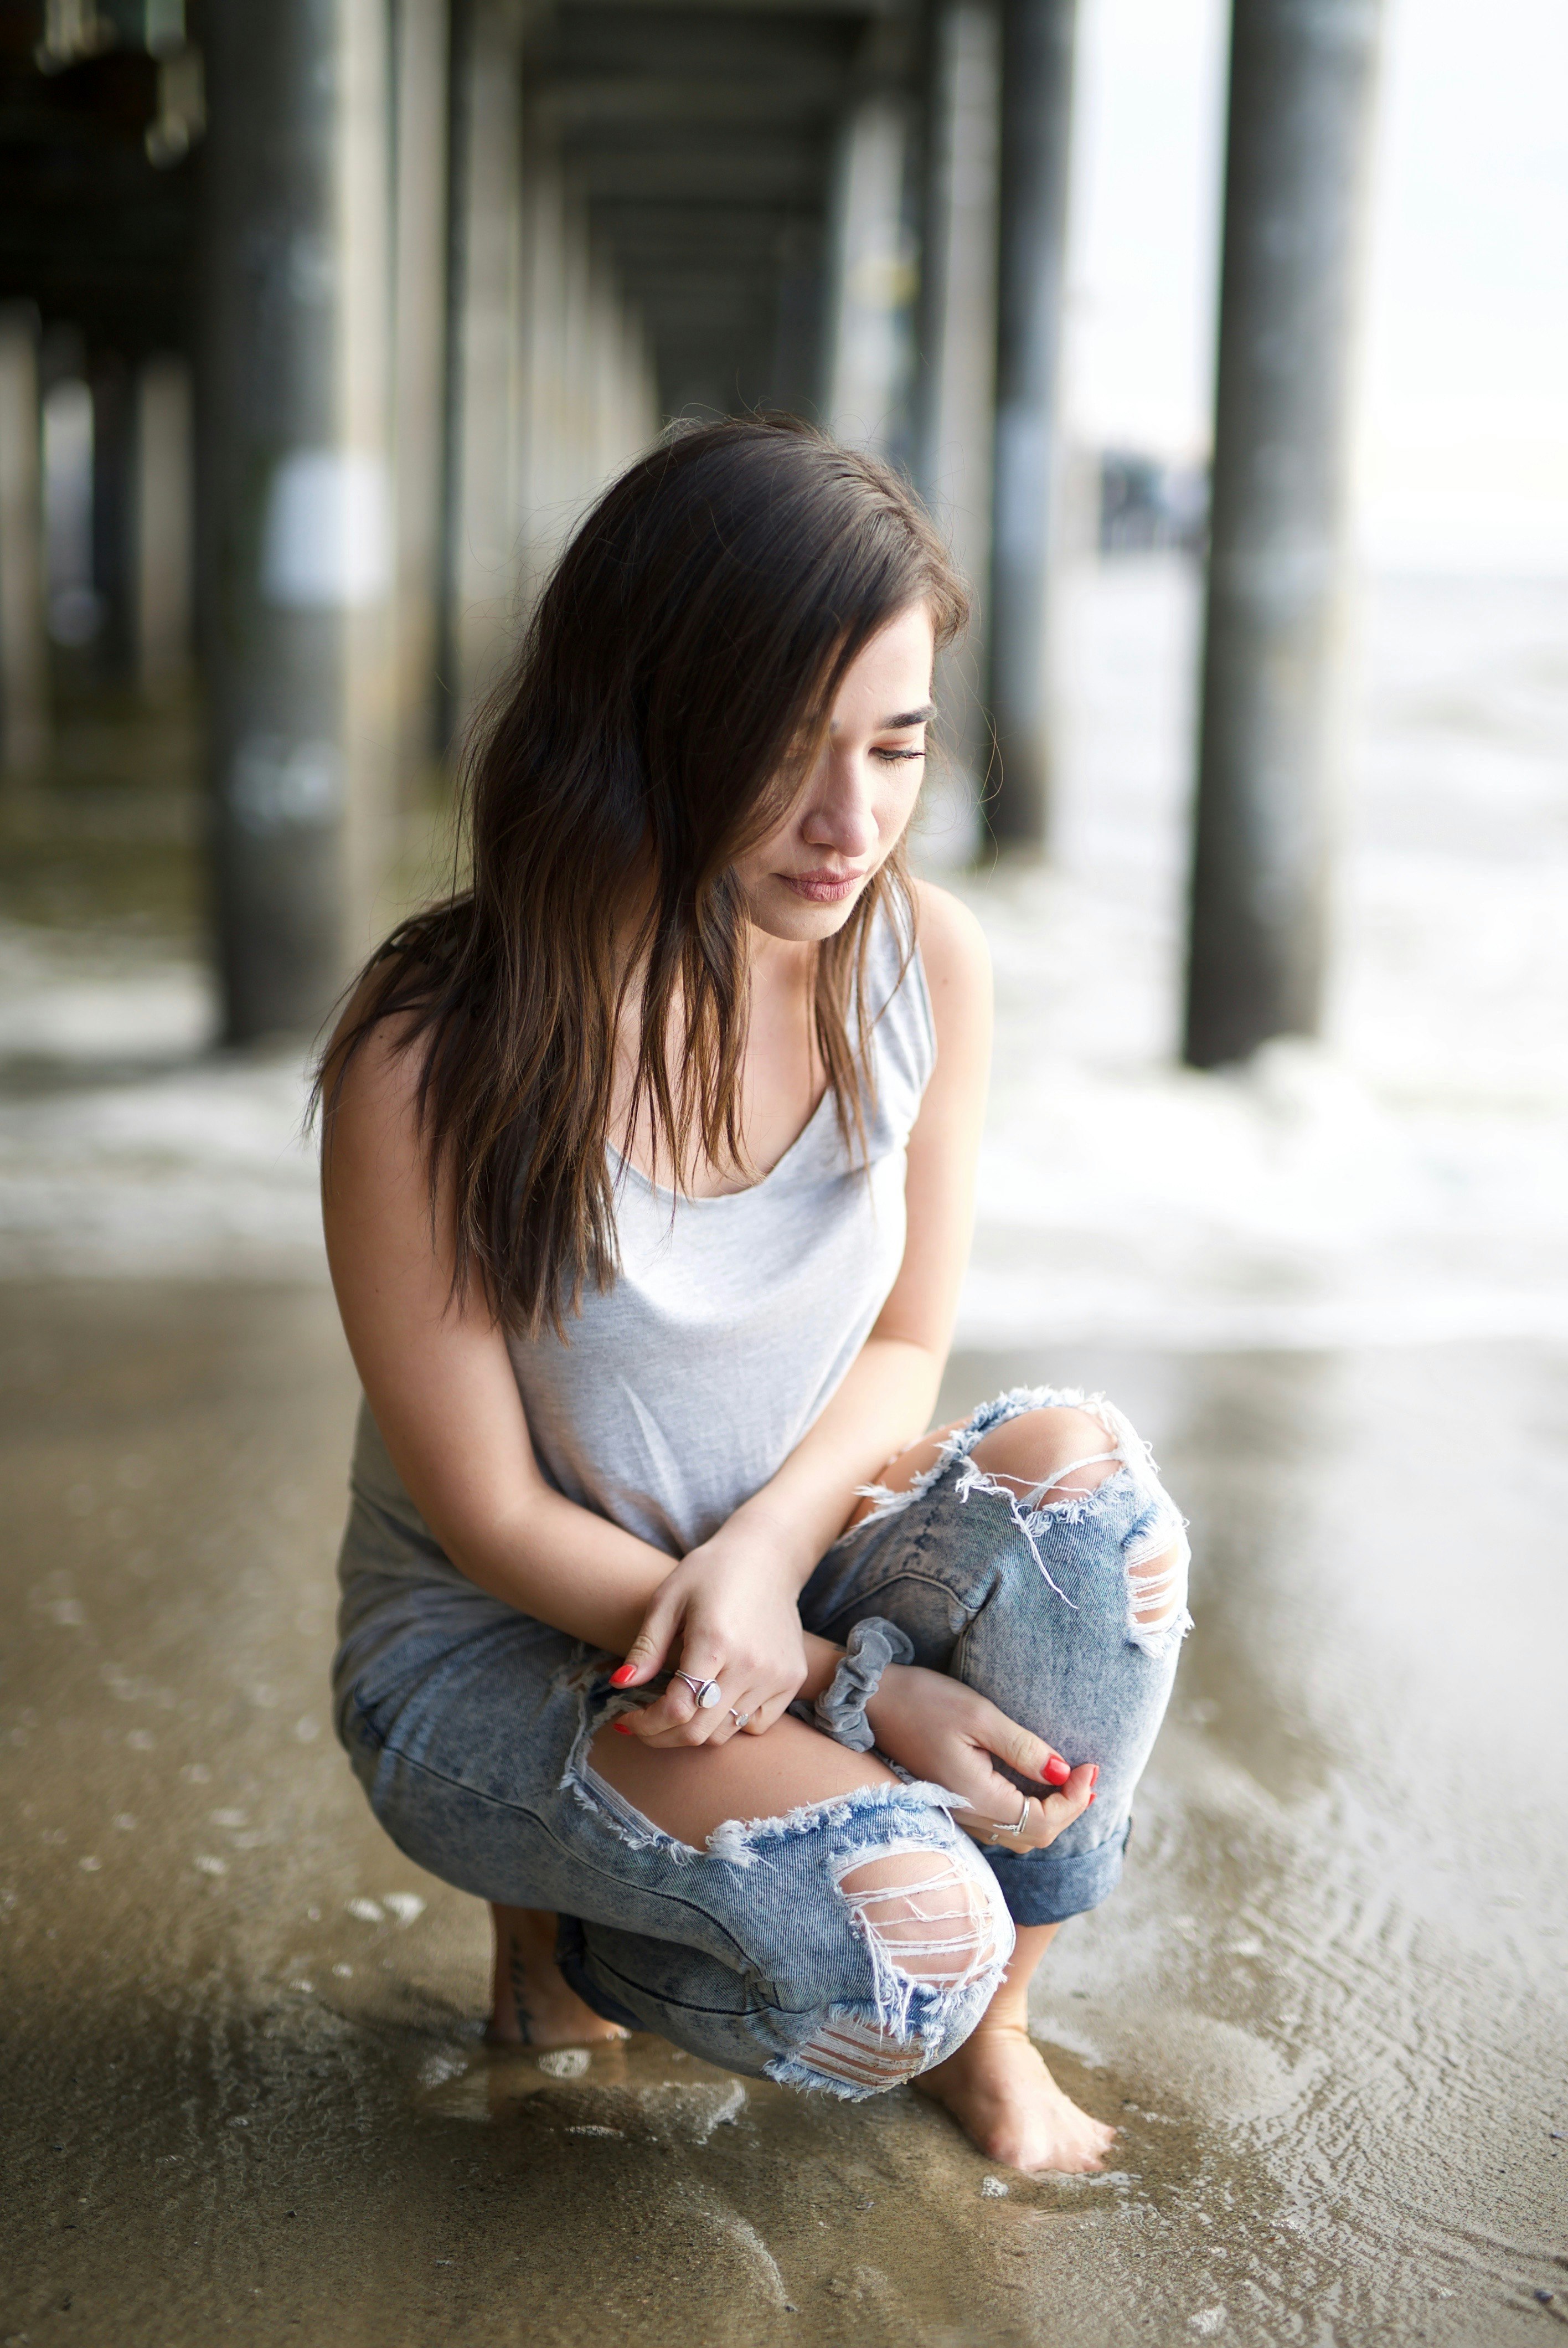 woman in white tank top and blue denim jeans sitting on concrete floor during daytime